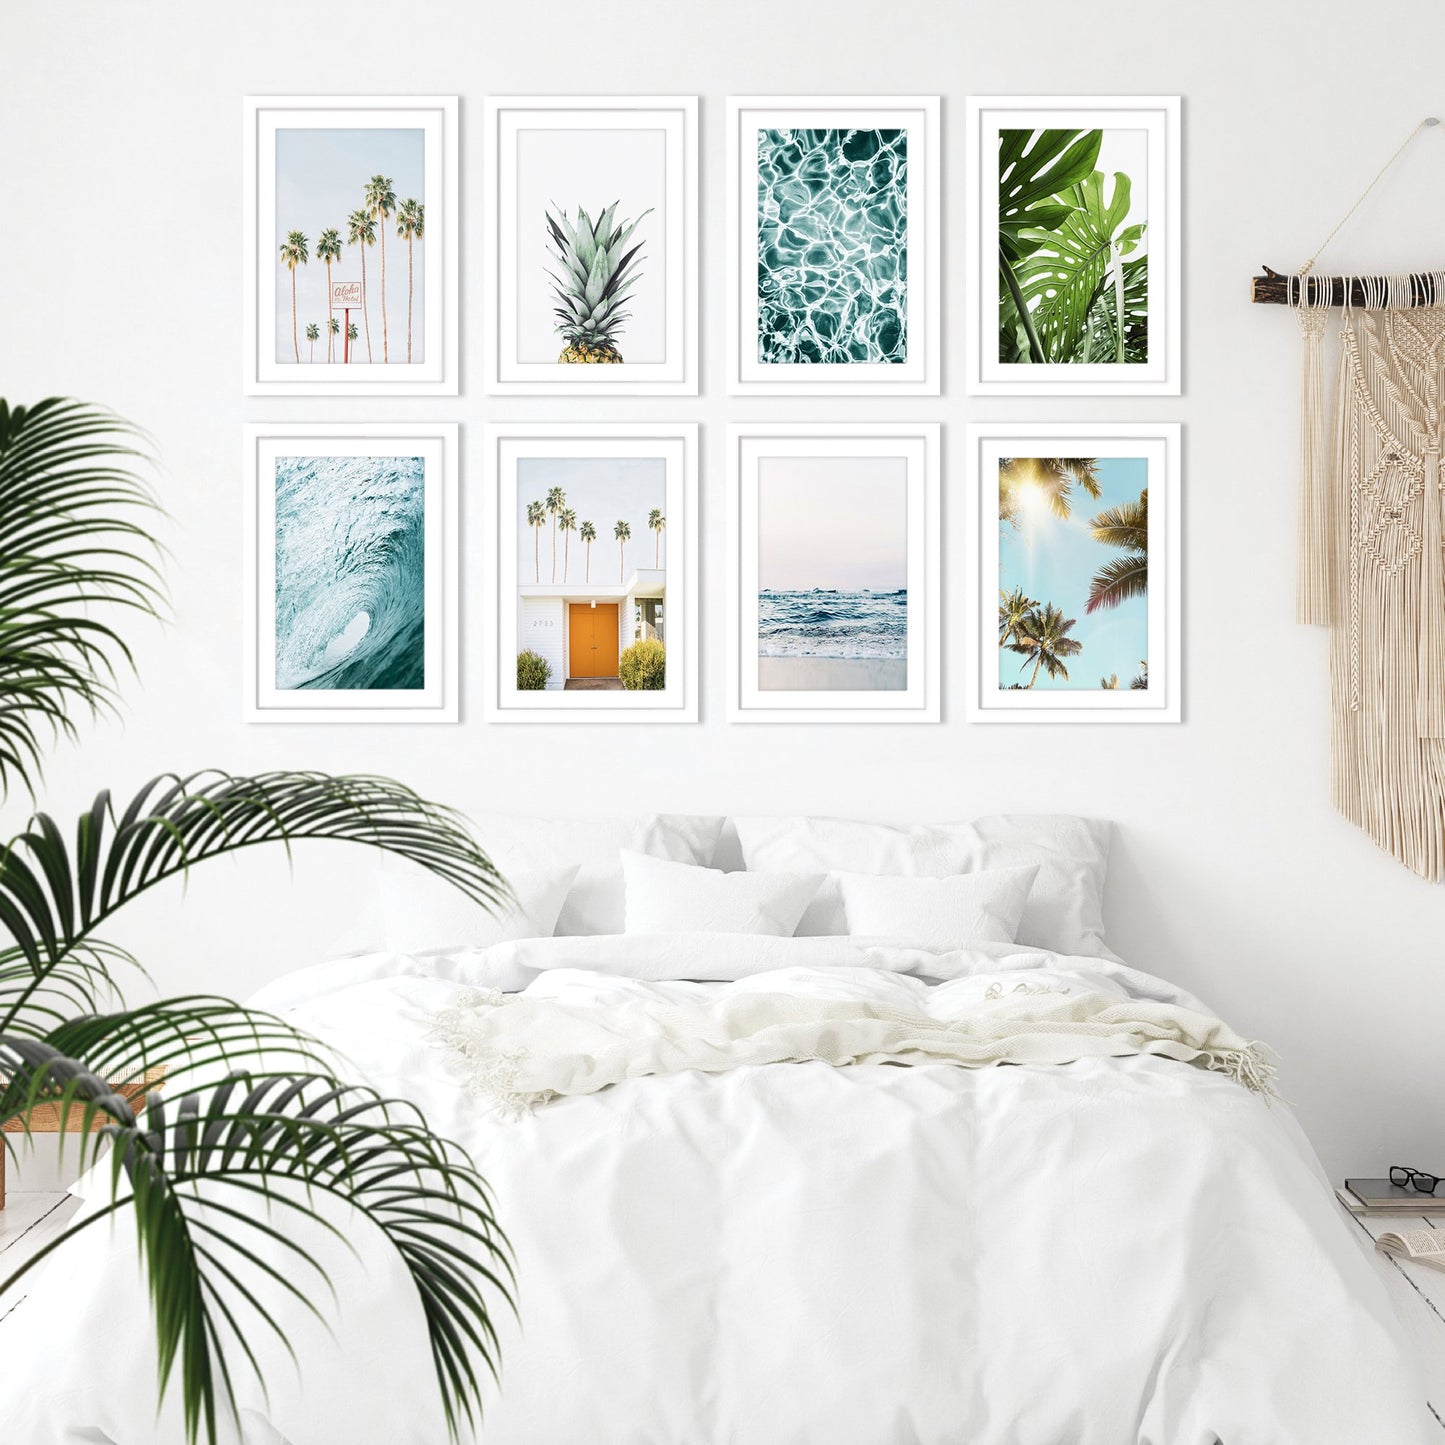 With You In Malibu by Sisi and Seb - 8 Piece Framed Art Set - Americanflat